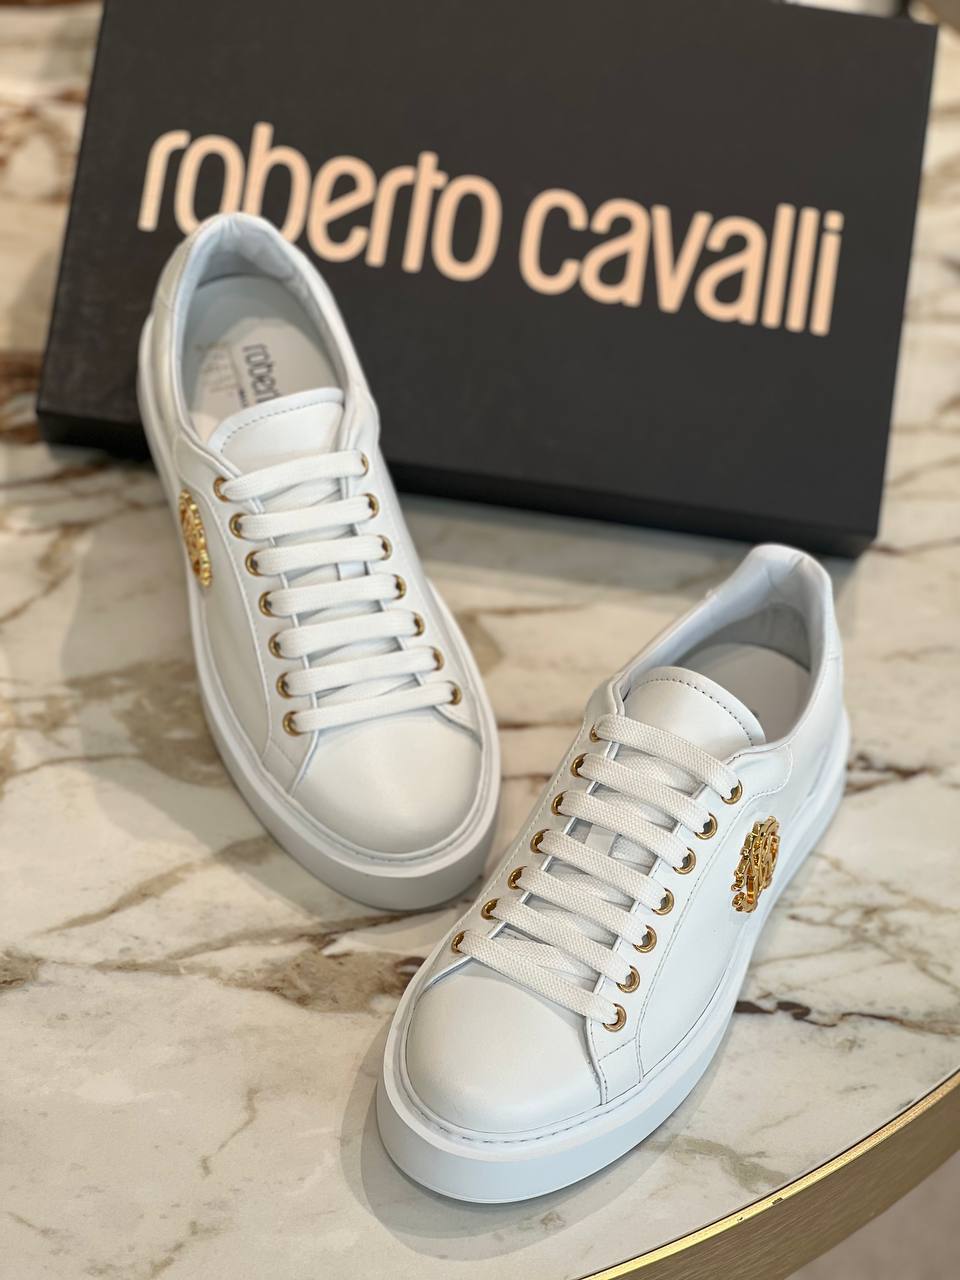 Roberto Cavalli Outlets 5774